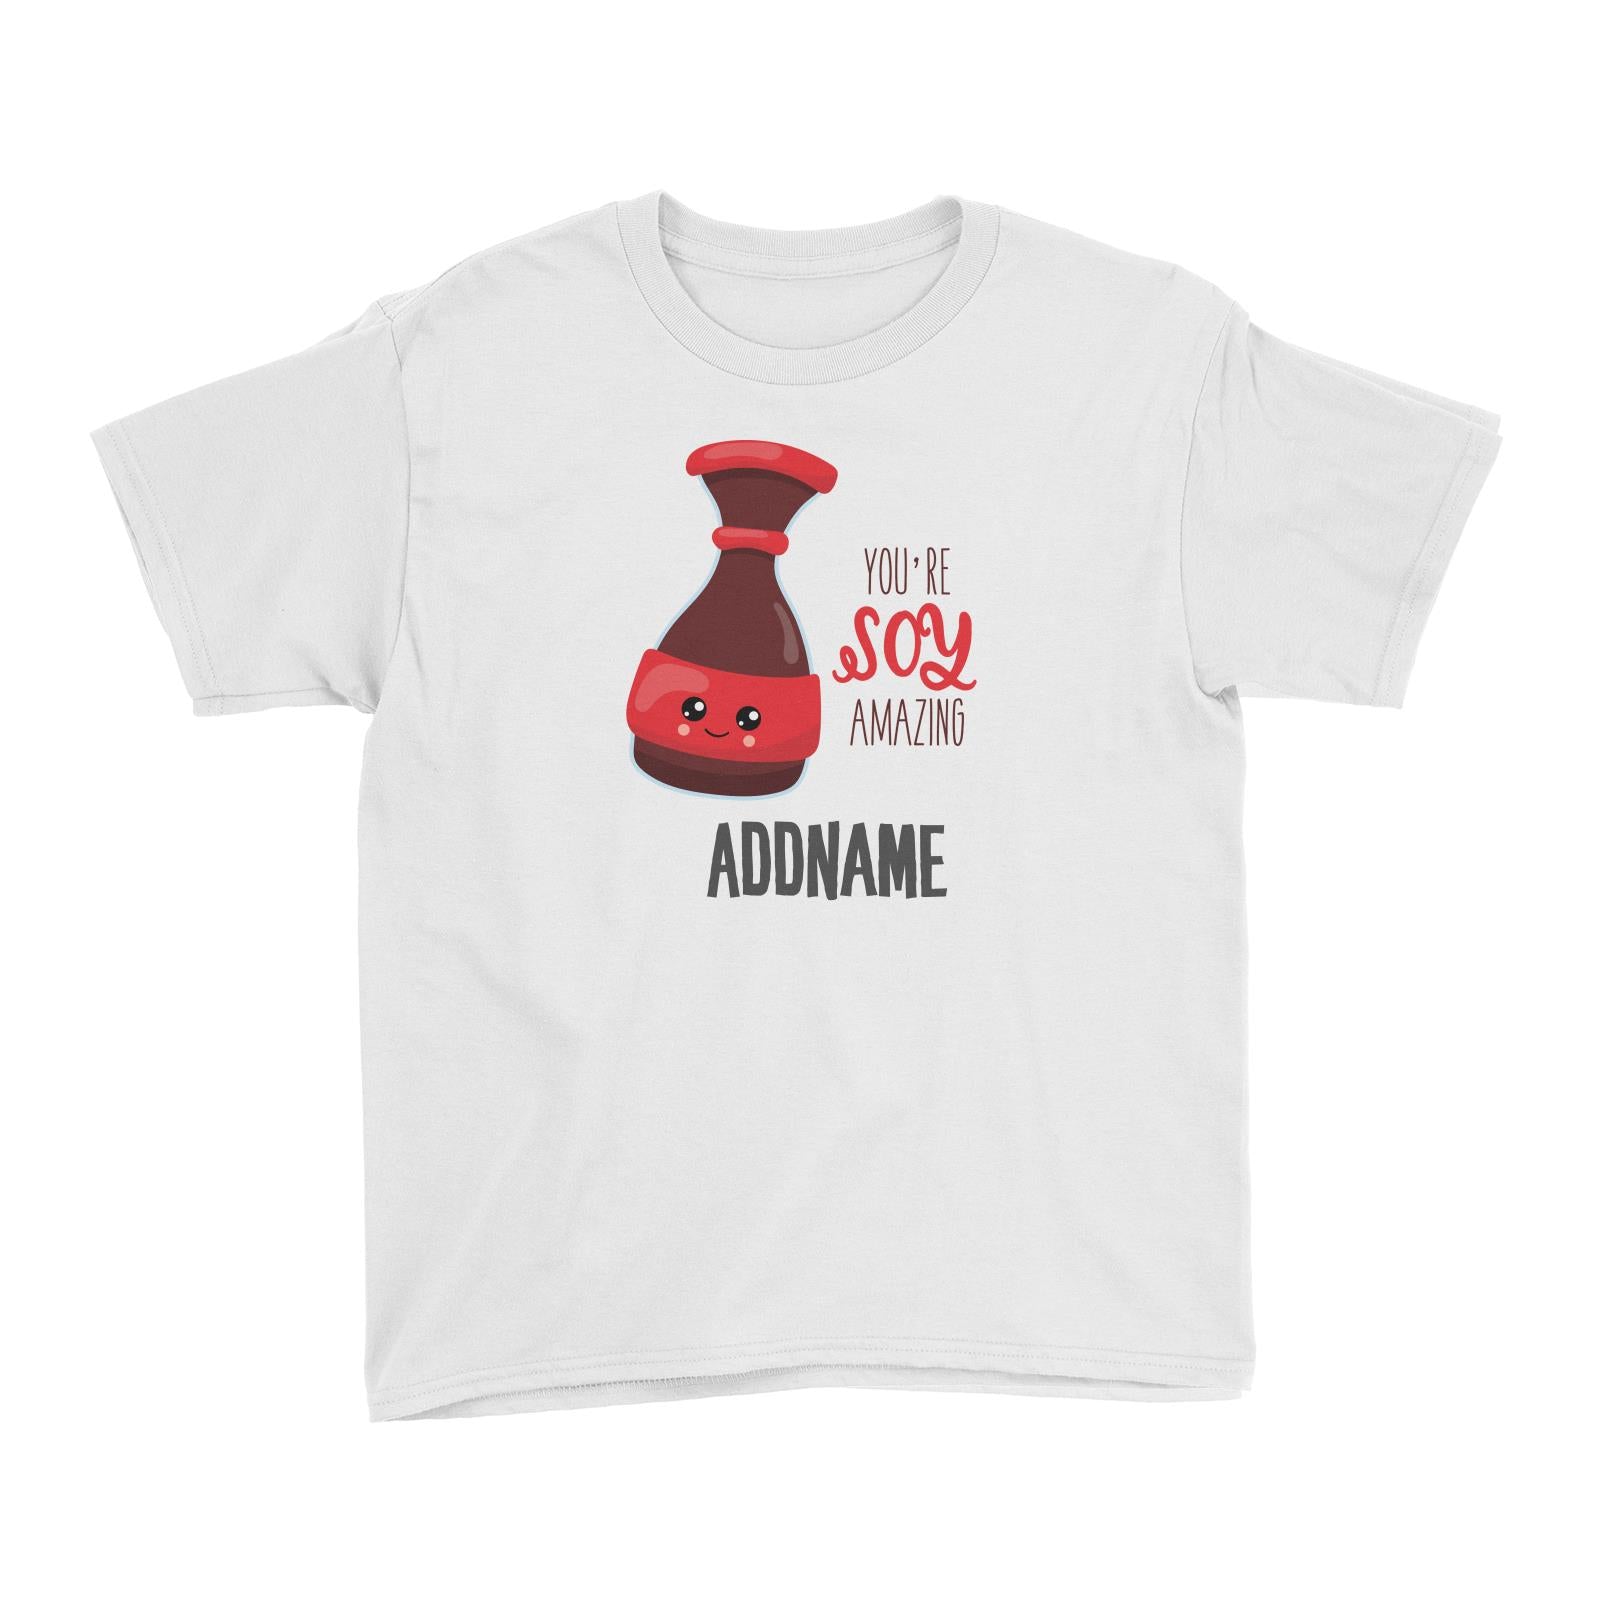 You're Soy Amazing Soy Sauce Addname Kid's T-Shirt